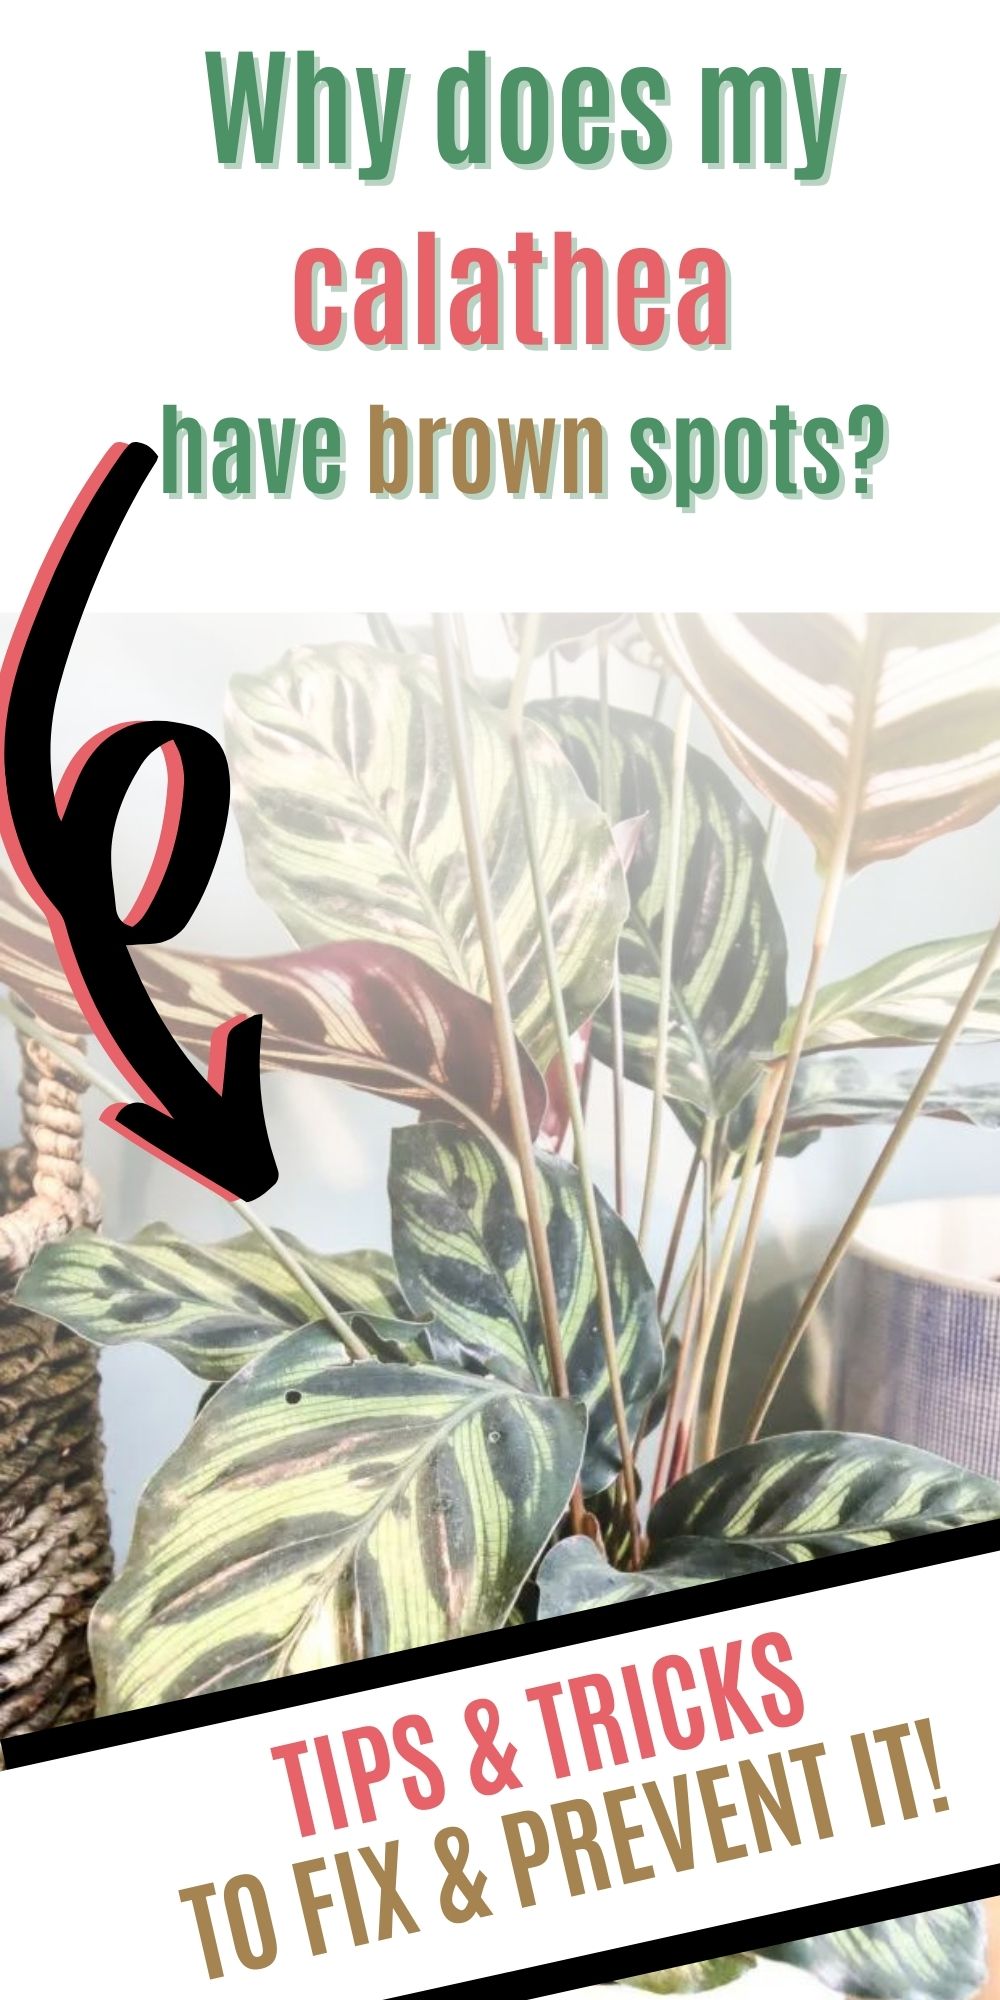 Why does my calathea have brown spots?